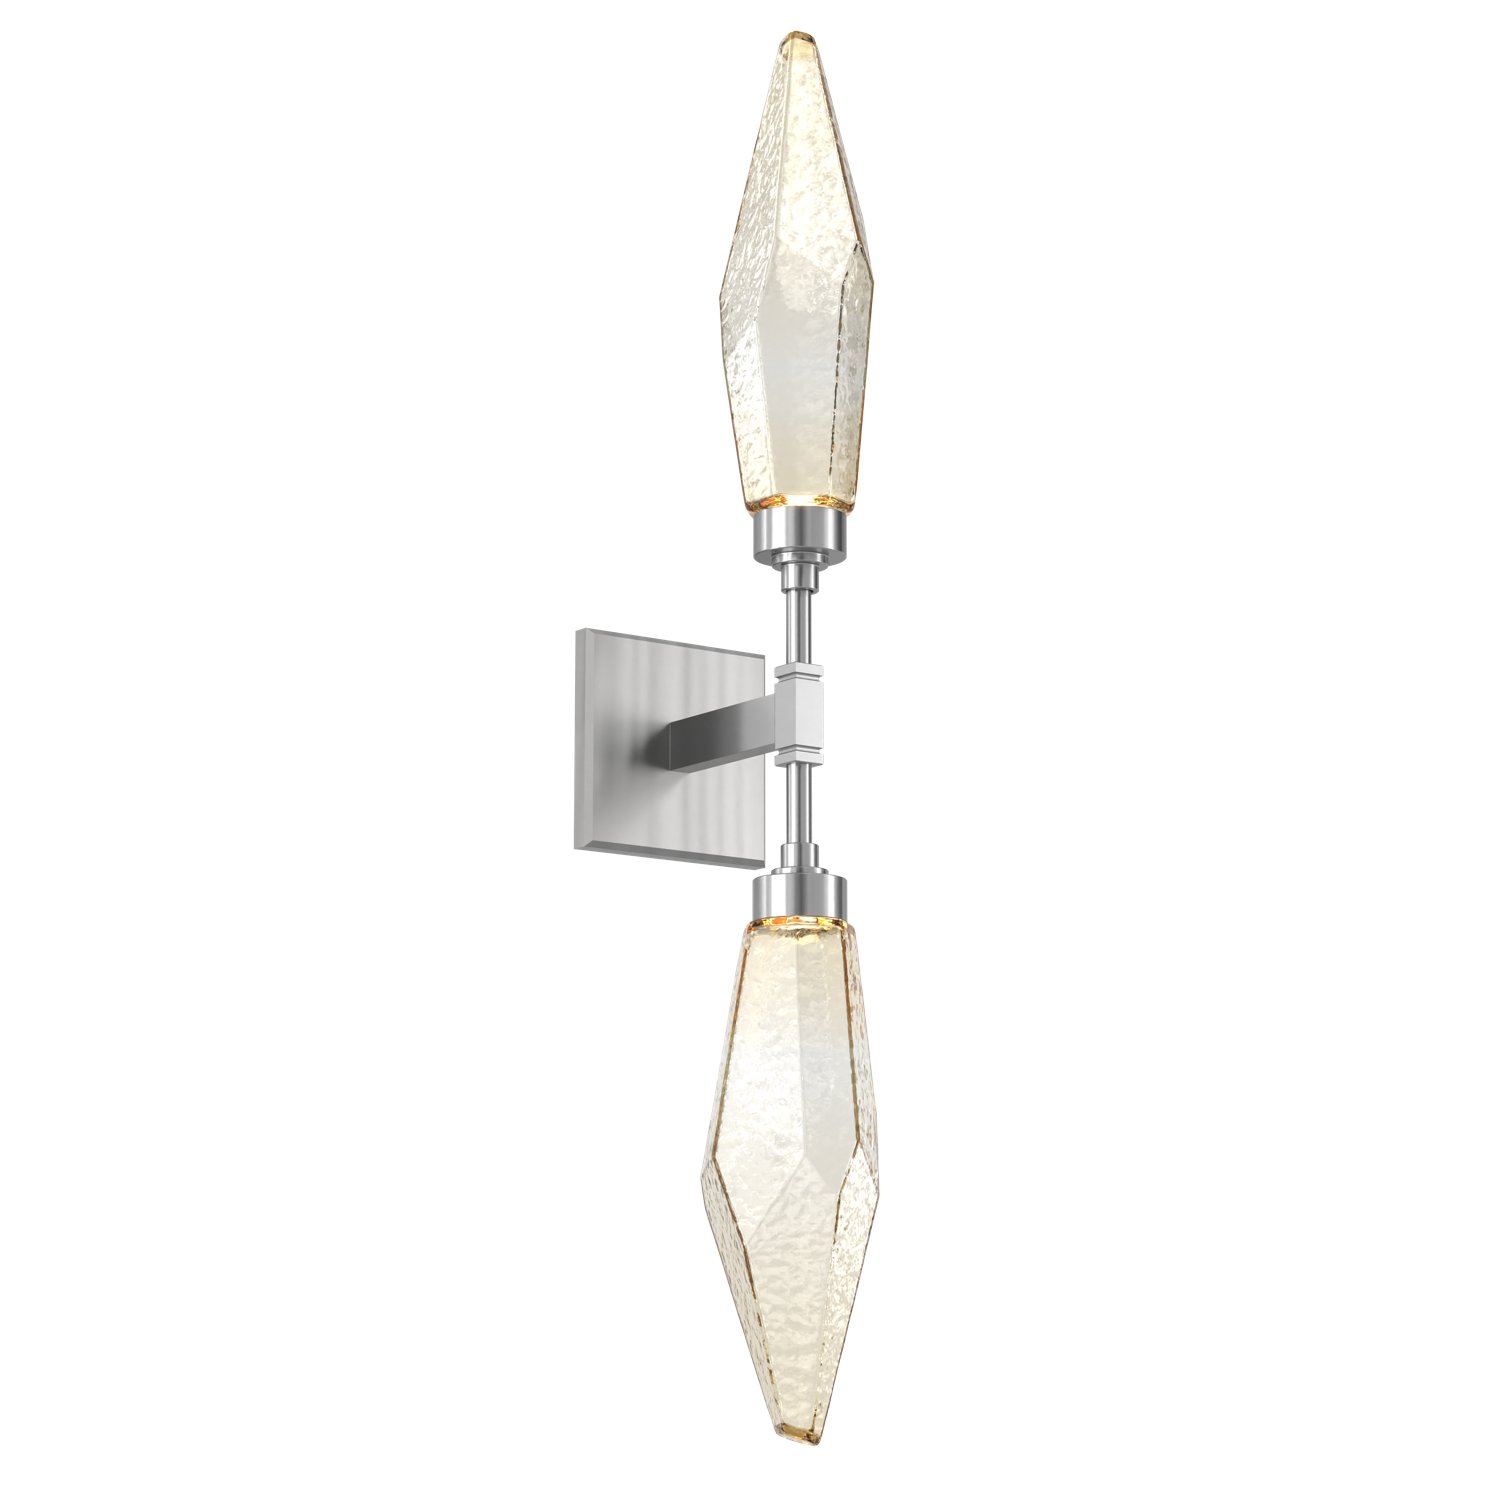 IDB0050-02-SN-CA-Hammerton-Studio-Rock-Crystal-wall-sconce-with-satin-nickel-finish-and-chilled-amber-blown-glass-shades-and-LED-lamping